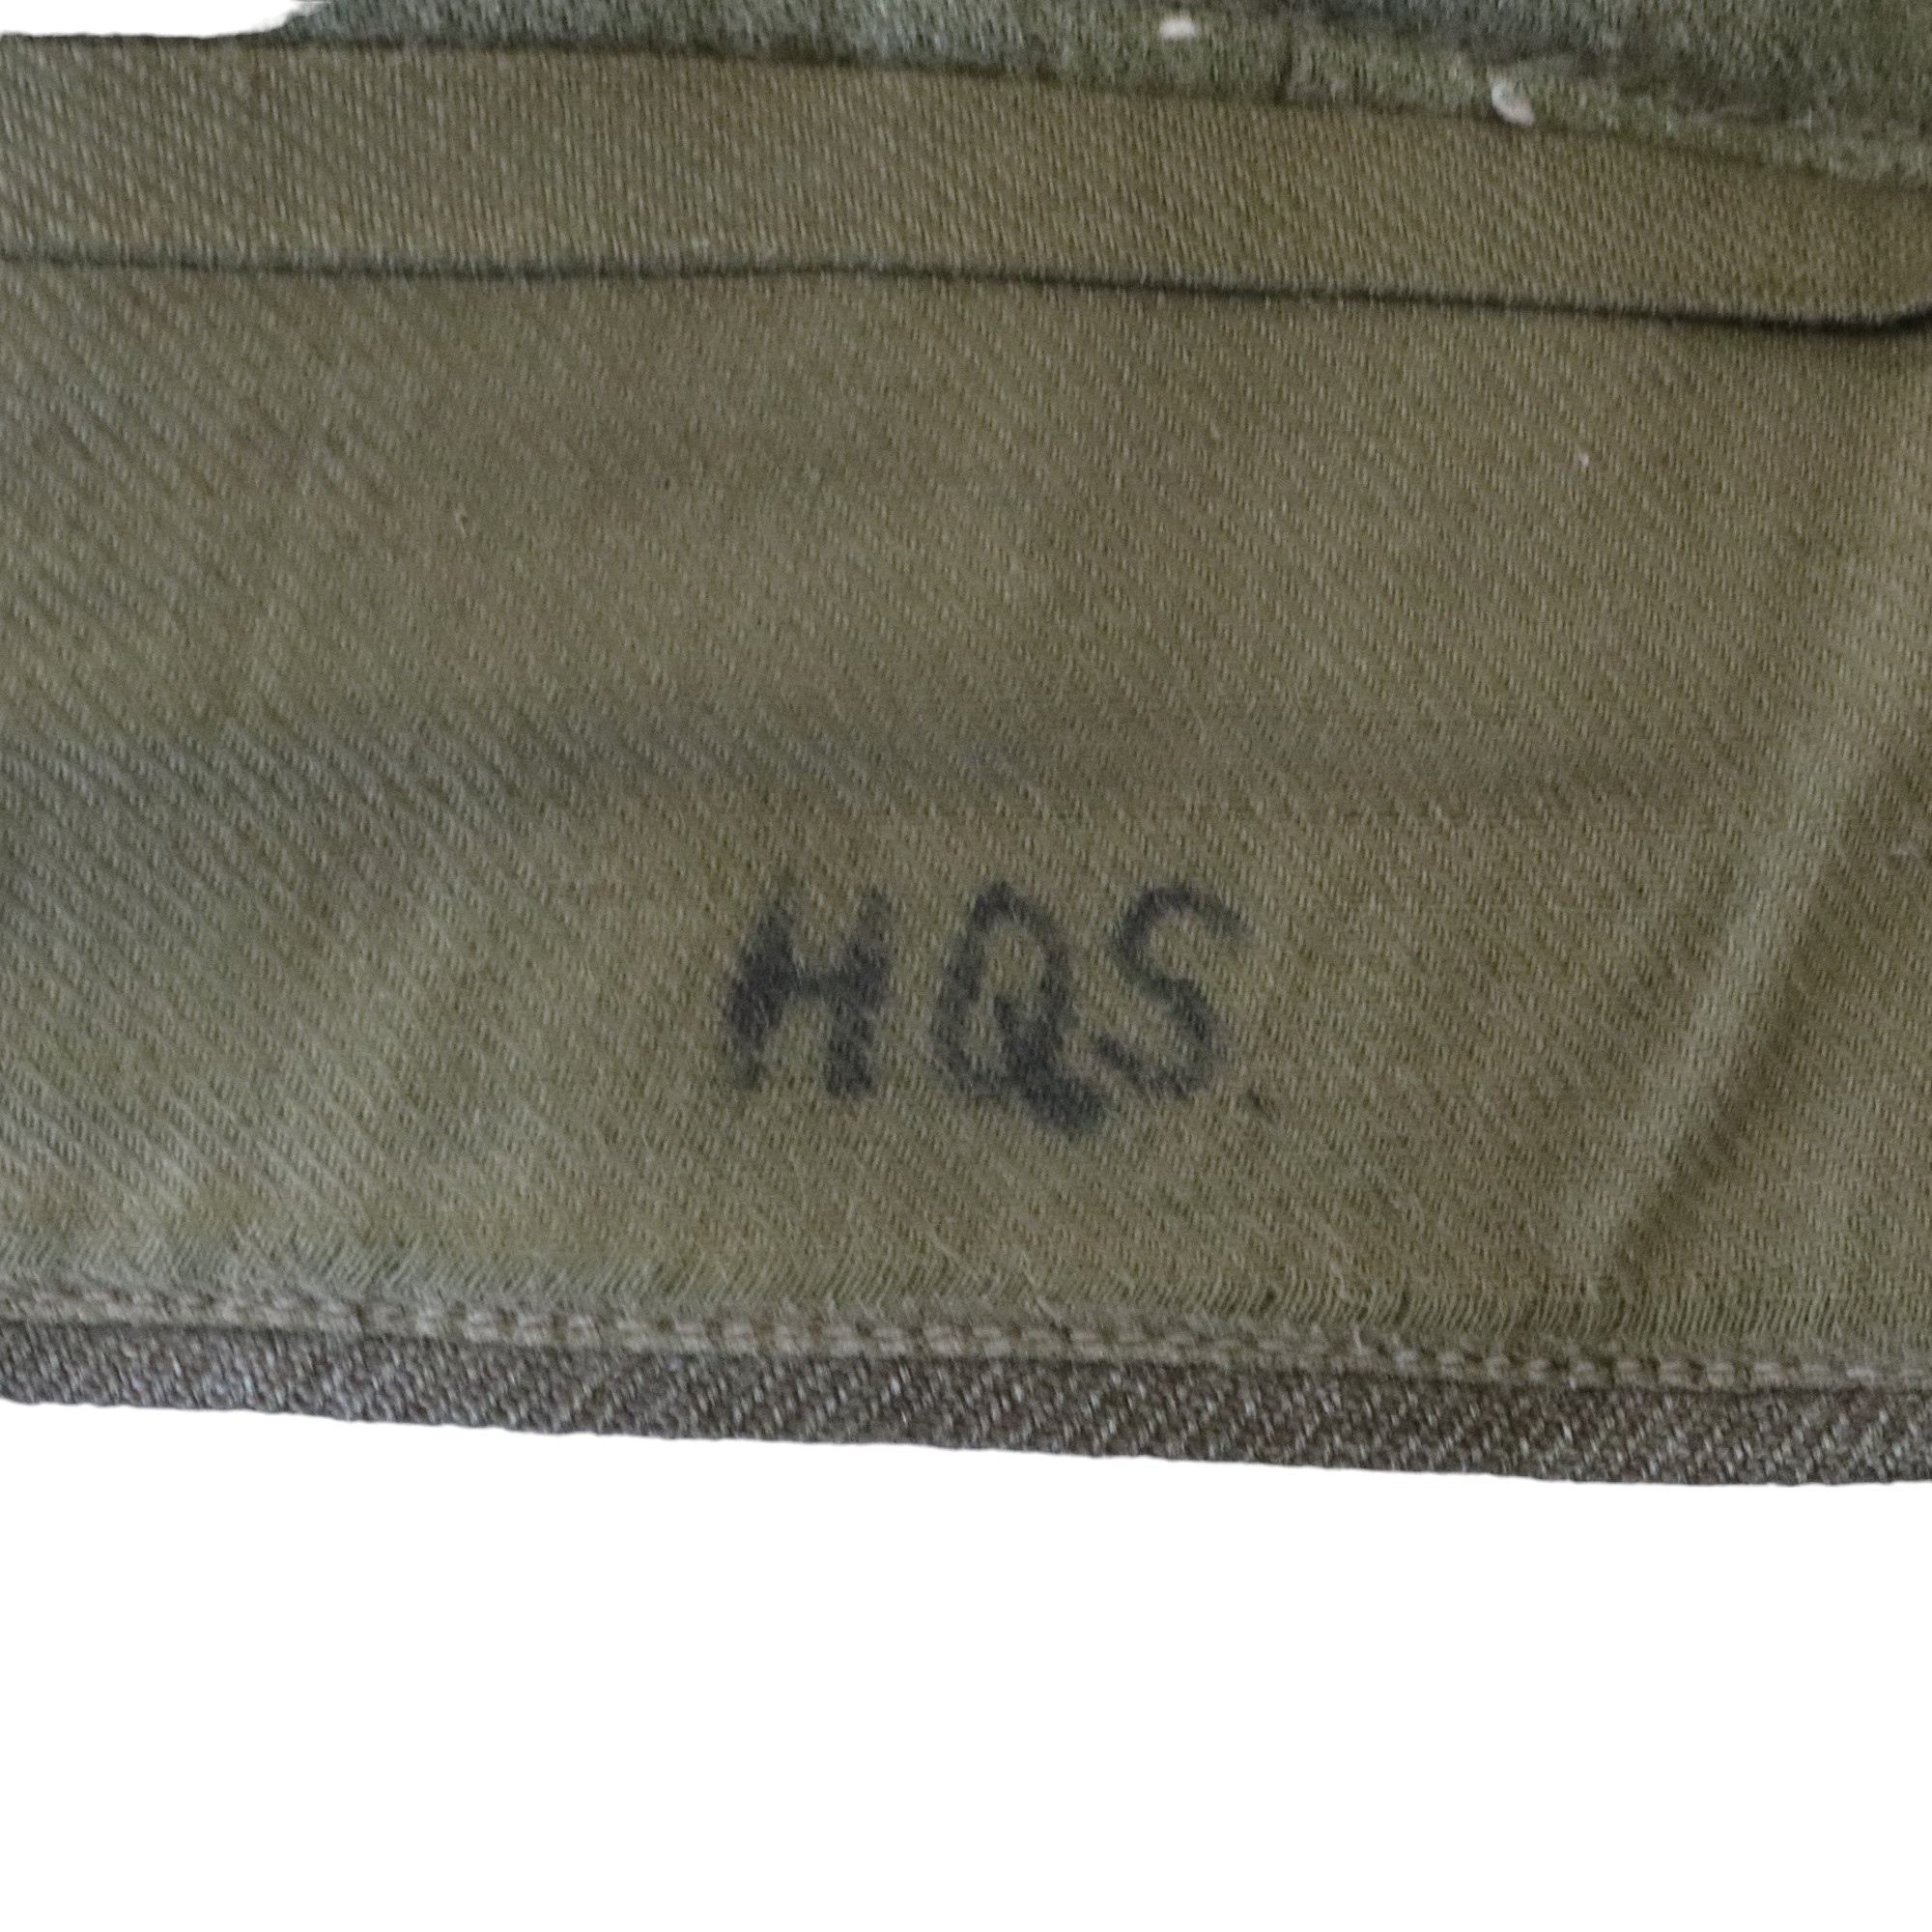 A private purchase Battledress Blouse bearing ATS, HQ 21st Army Group insignia - Image 6 of 6